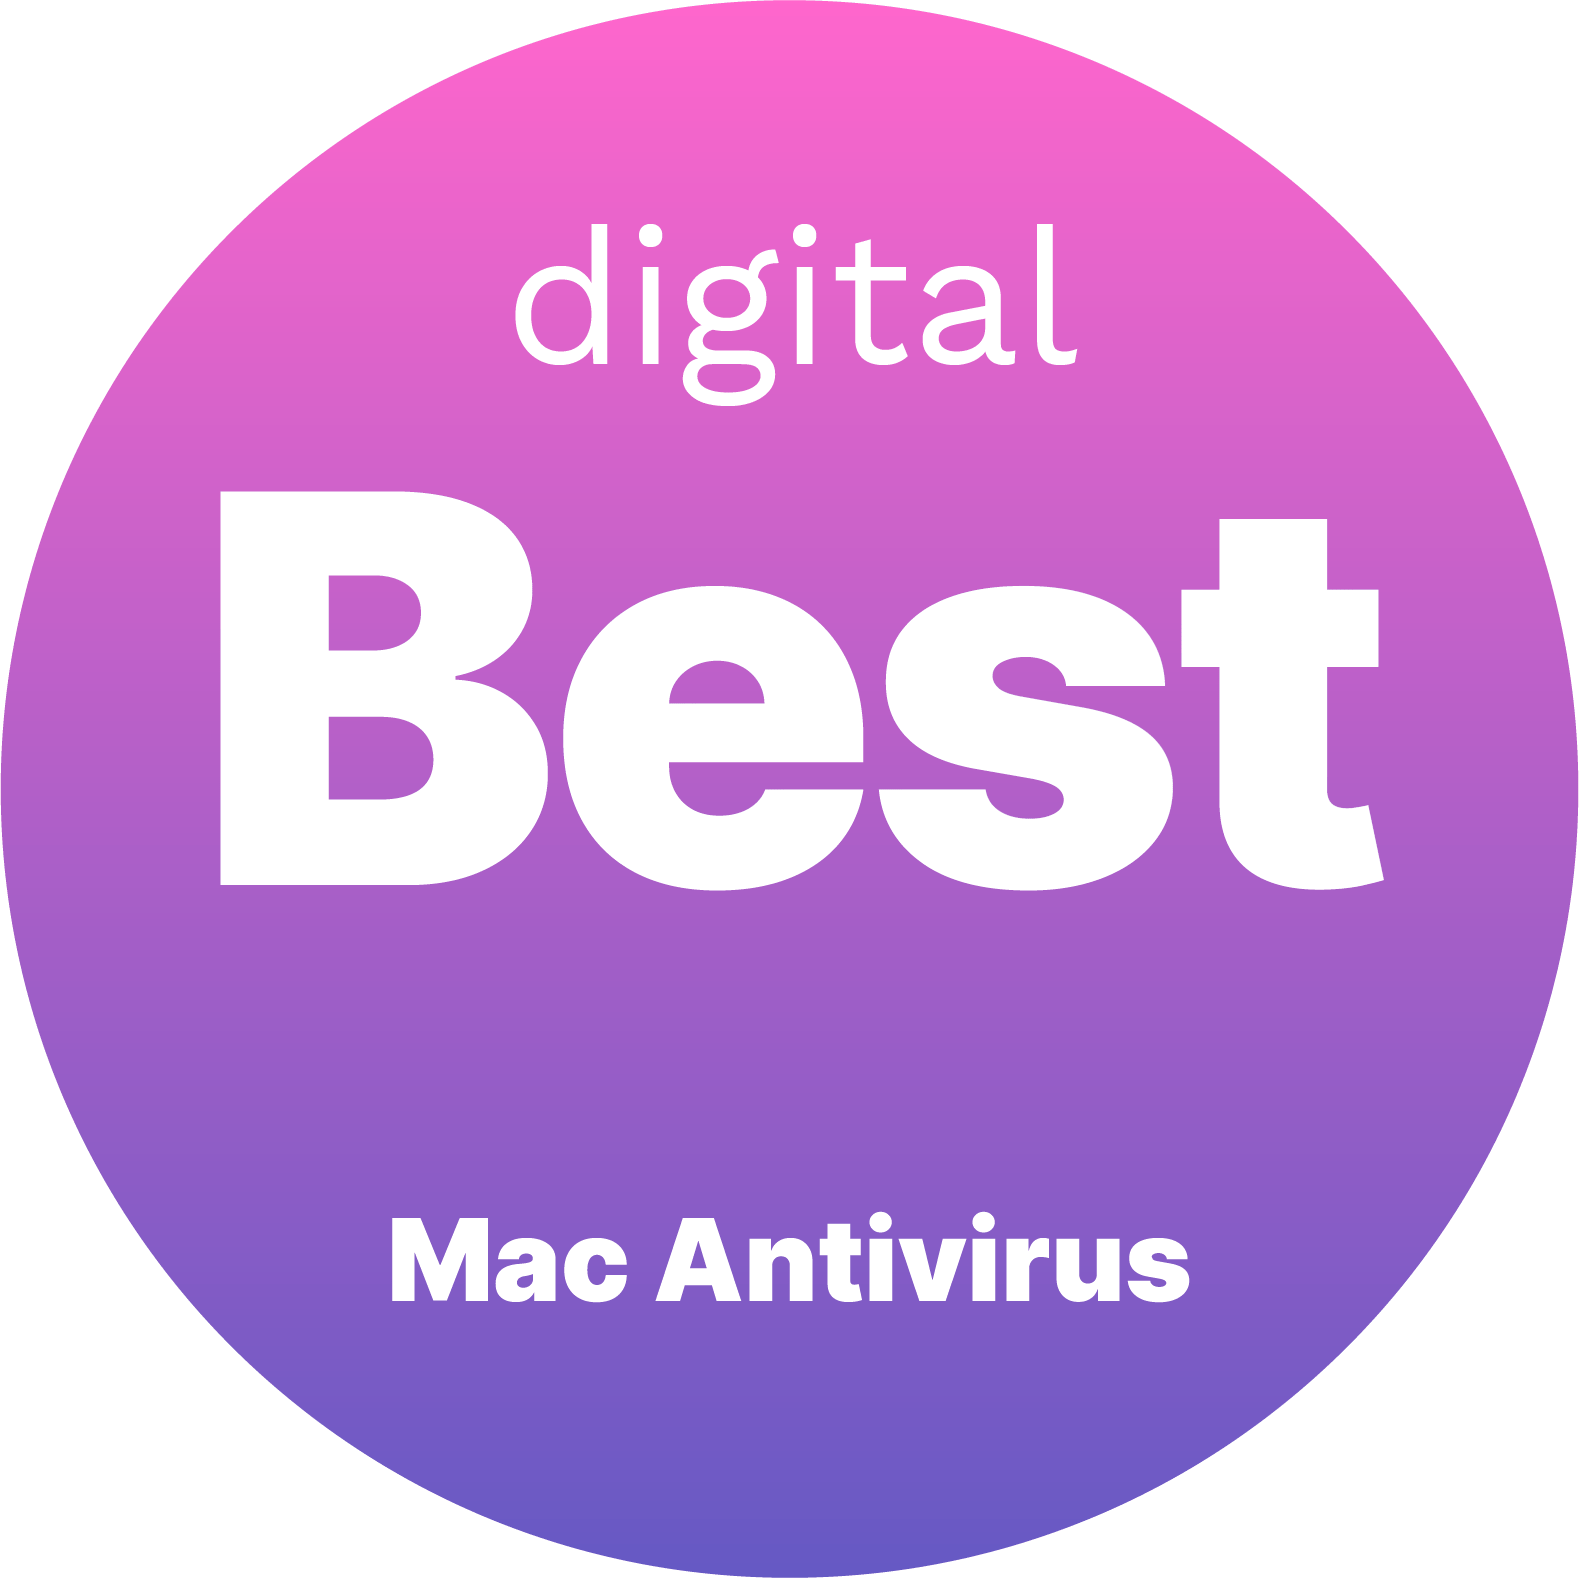 what ia the best mac computer malware, antivirus, cleaner and remediation software for mac